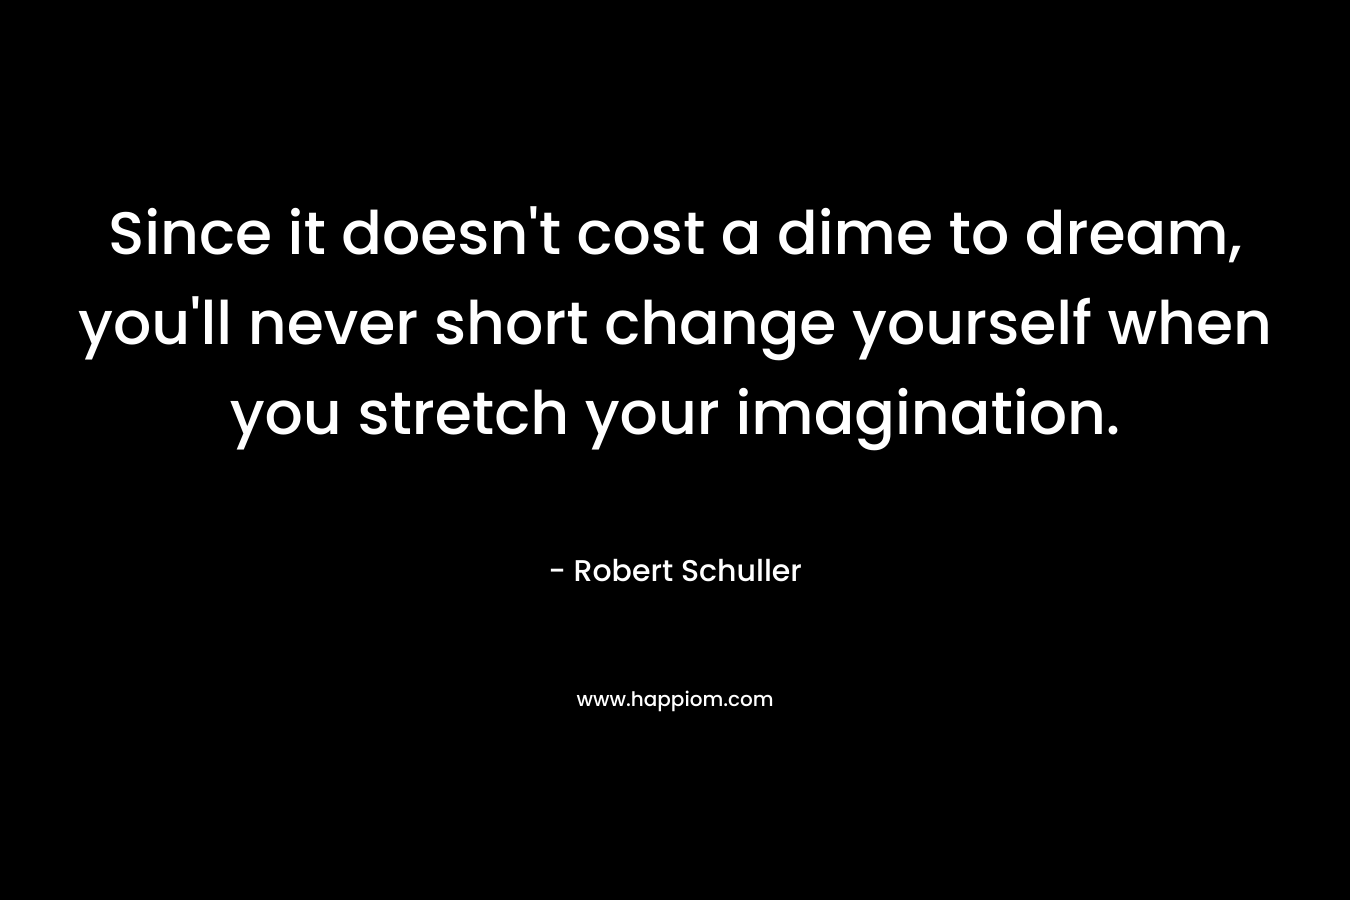 Since it doesn't cost a dime to dream, you'll never short change yourself when you stretch your imagination.